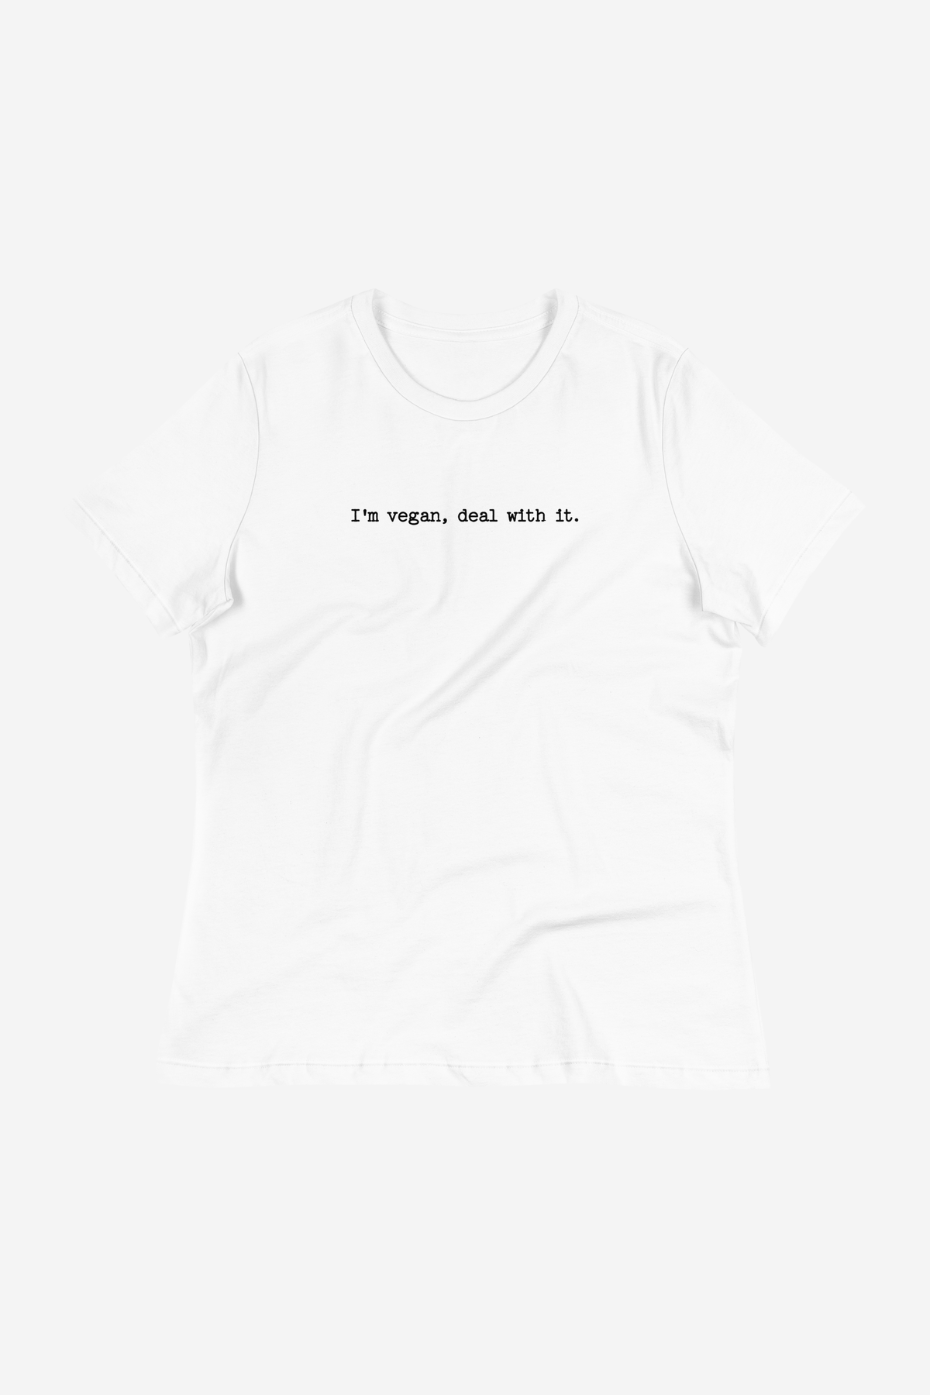 Deal With it Women's Relaxed T-Shirt